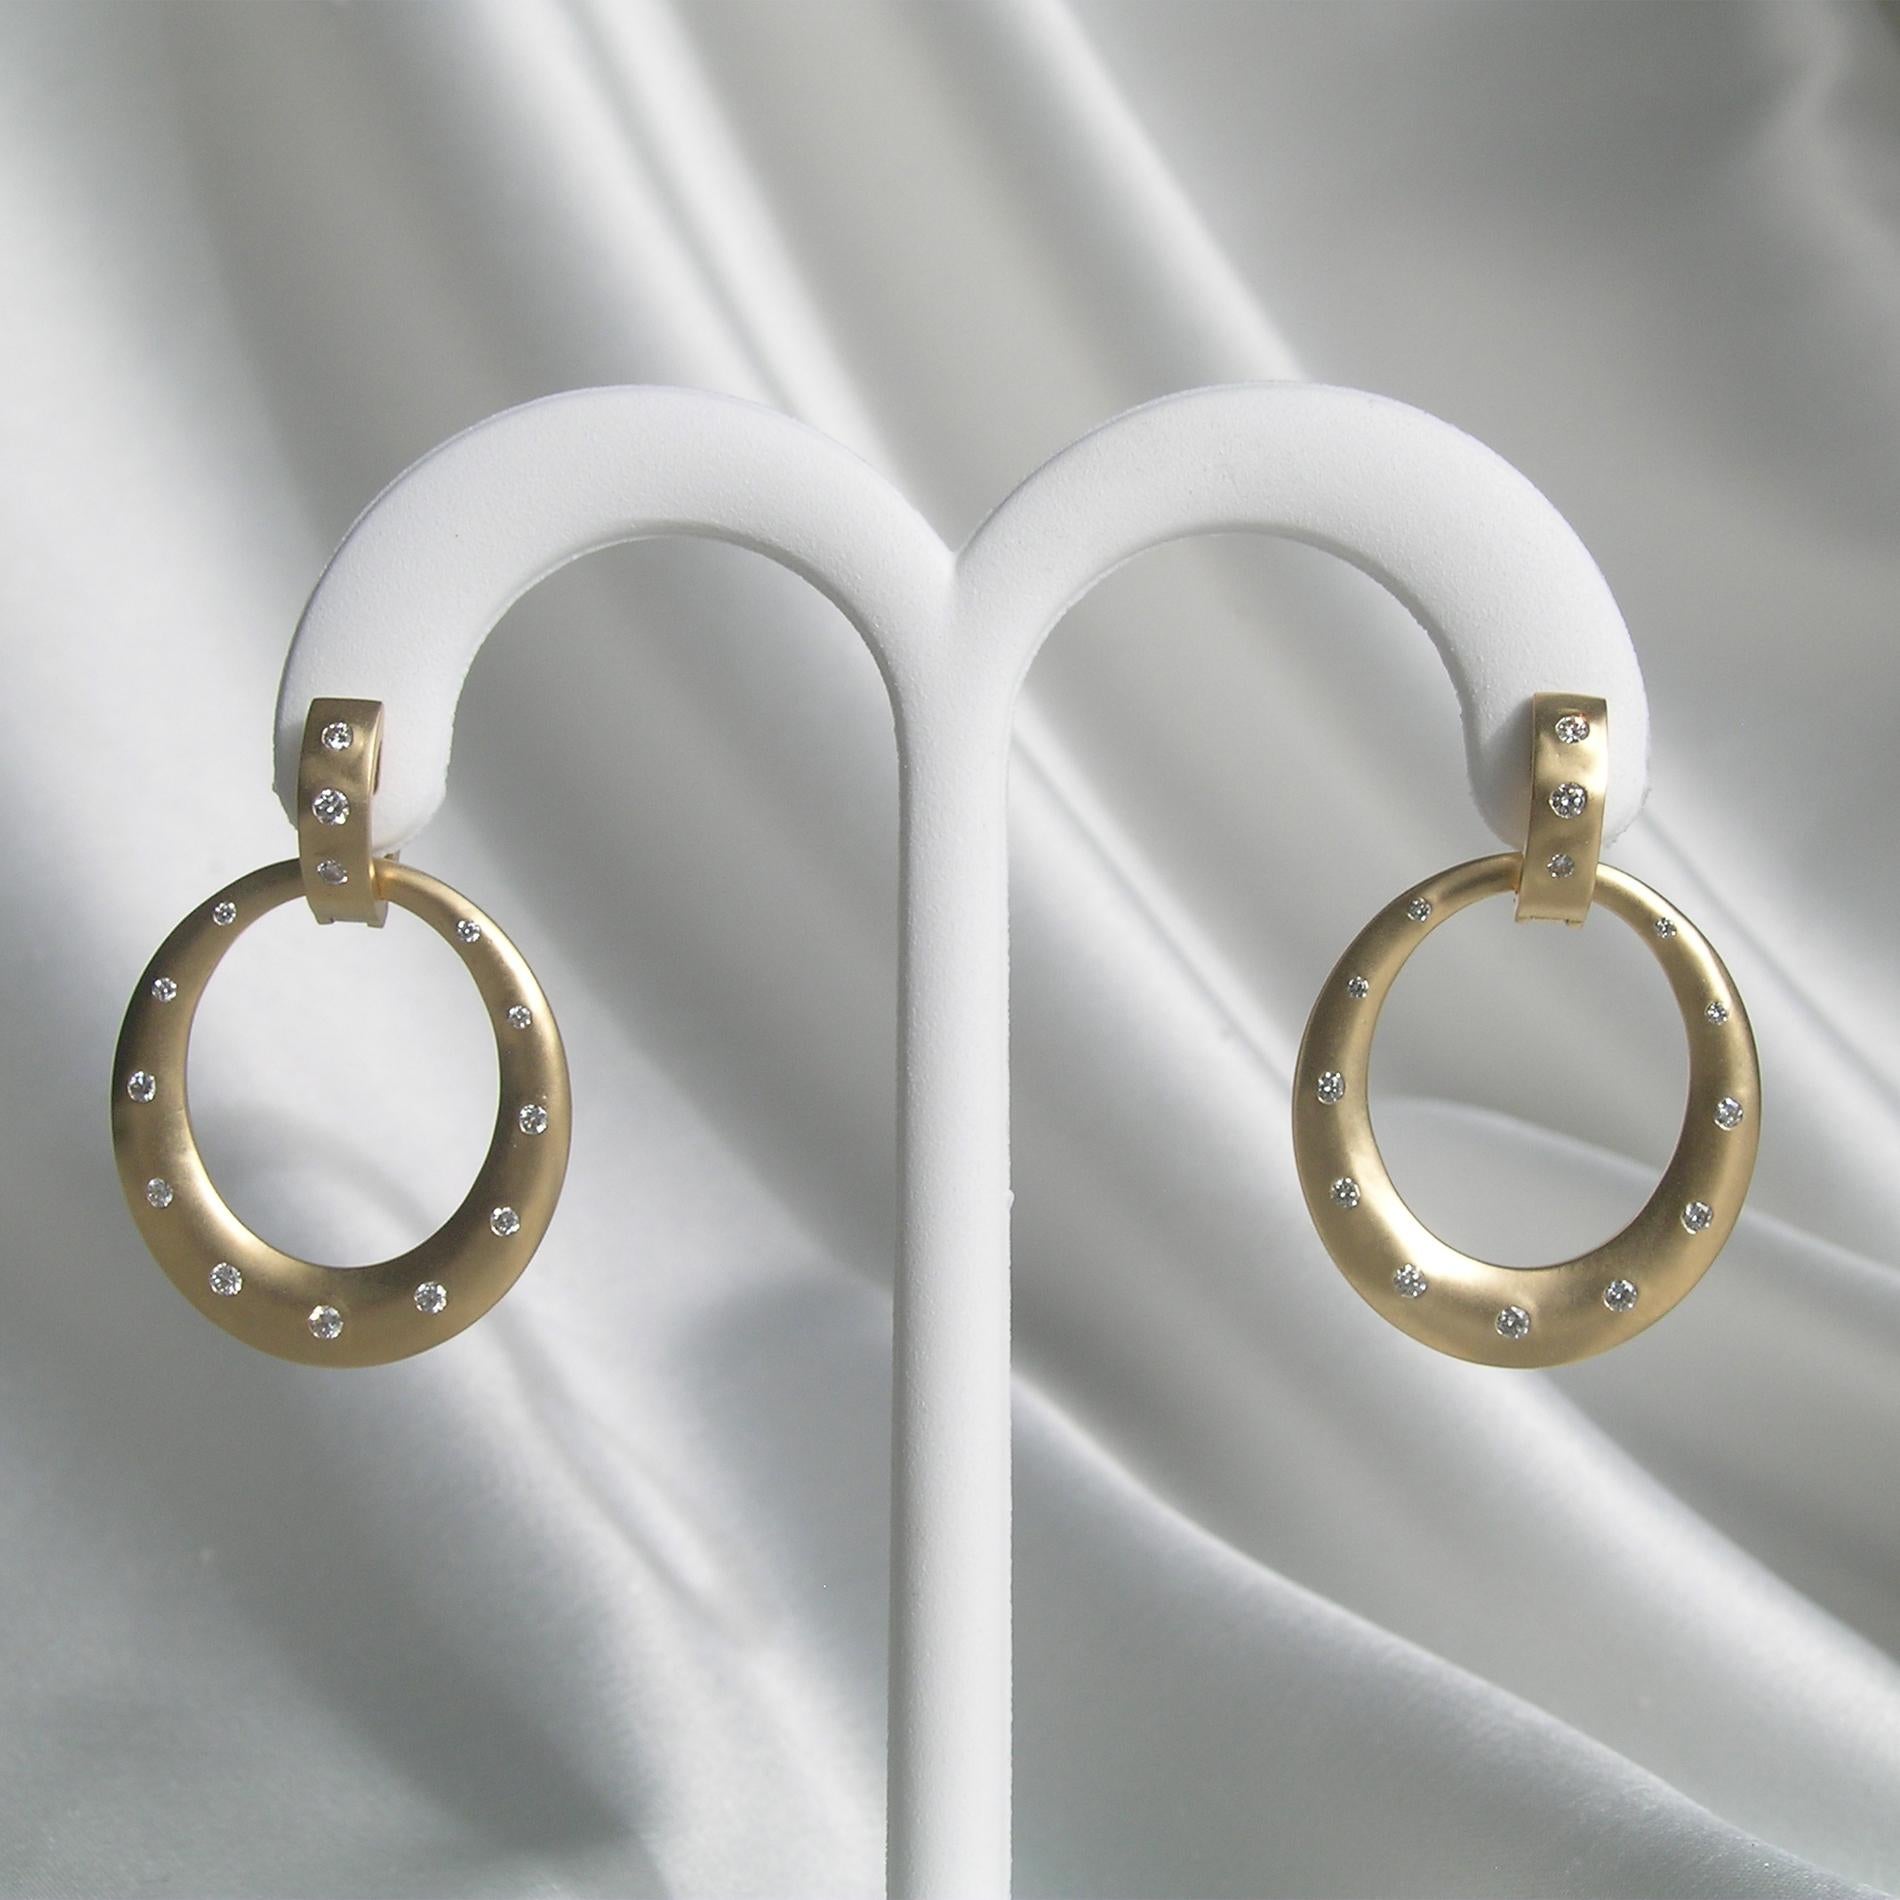 A unique hoop earring design, they face forward  The double hoop design allows the bottom hoop to move so it faces forward and to the side.  The disc of gold is accented with smooth set diamonds.  There are over a half carat of diamonds used in